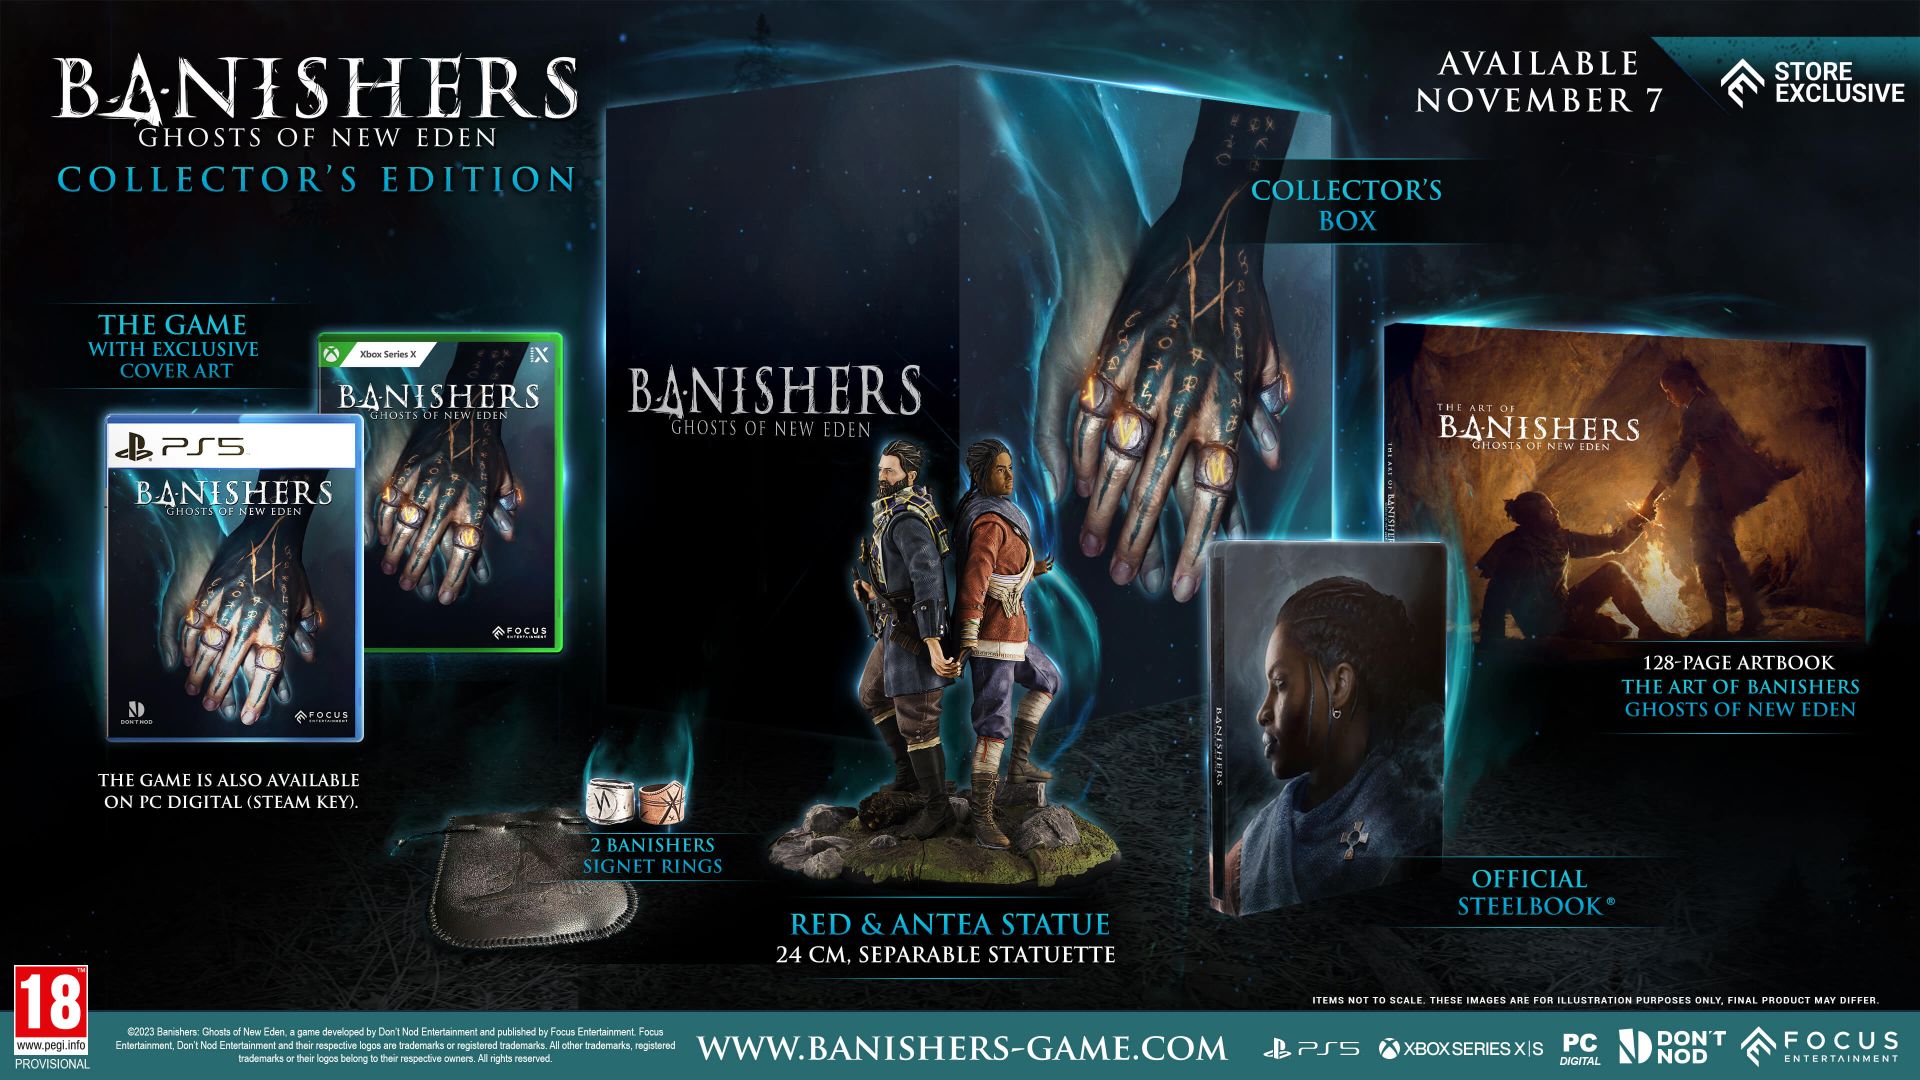 Banishers: Ghosts of New Eden Collector's Edition including a separable statuette of Red and Antea, the game’s official artbook, a Steelbook®, two Banishers signet rings, and the game on the platform of your choice (physical copies for consoles, digital copy for PC) with the Wanderer Set in-game DLC.